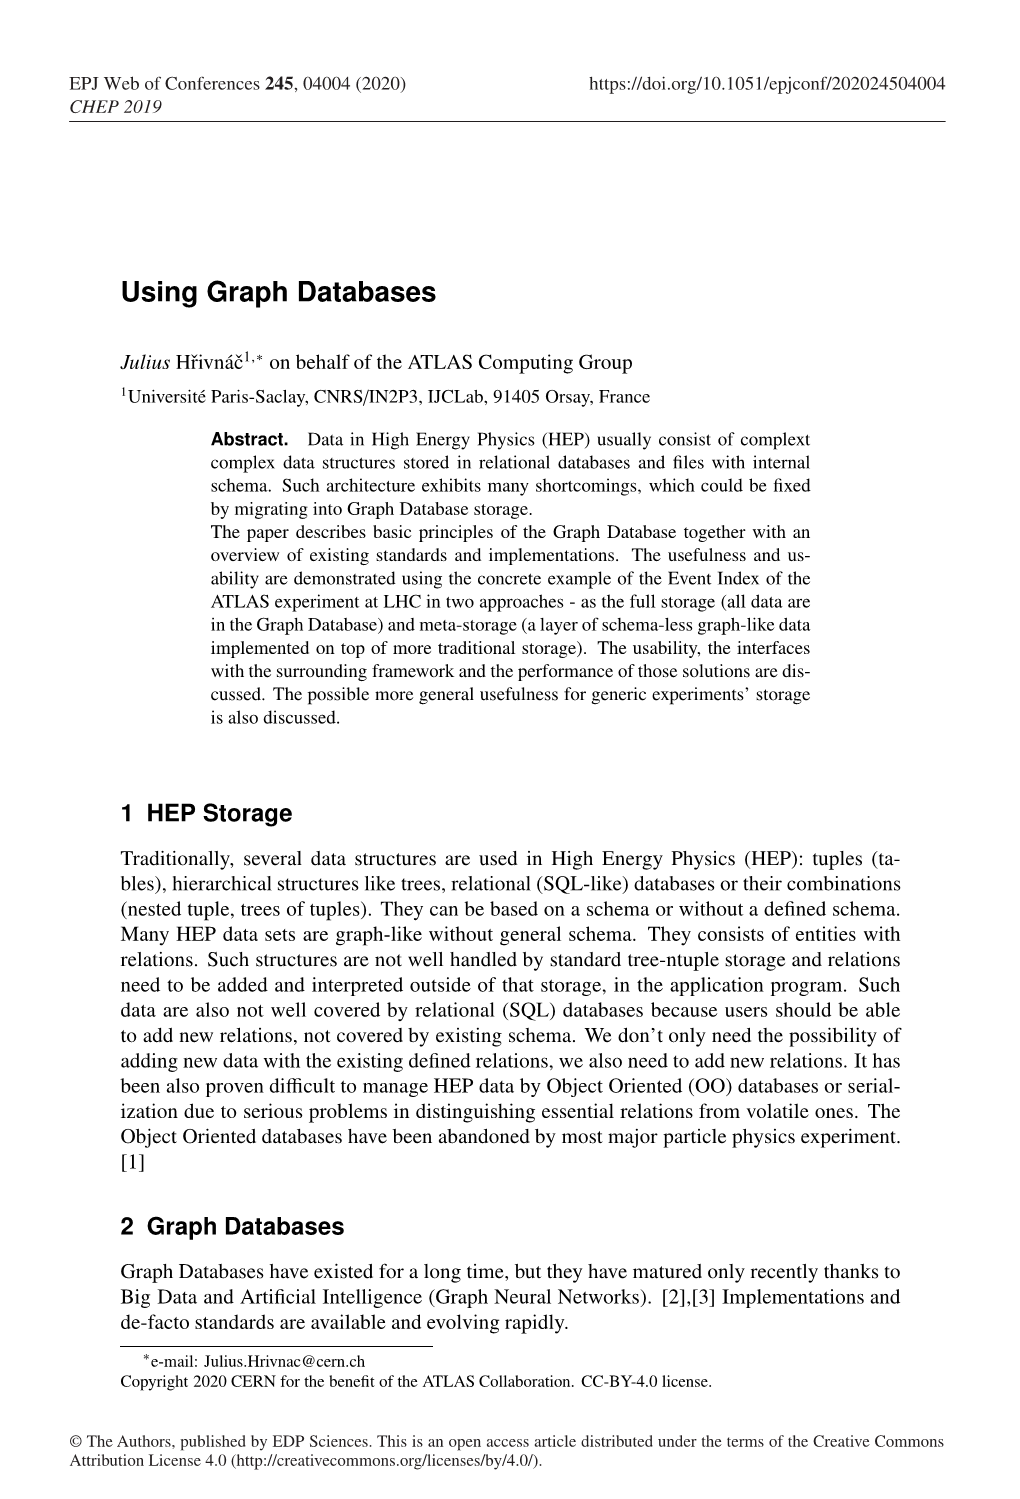 Using Graph Databases